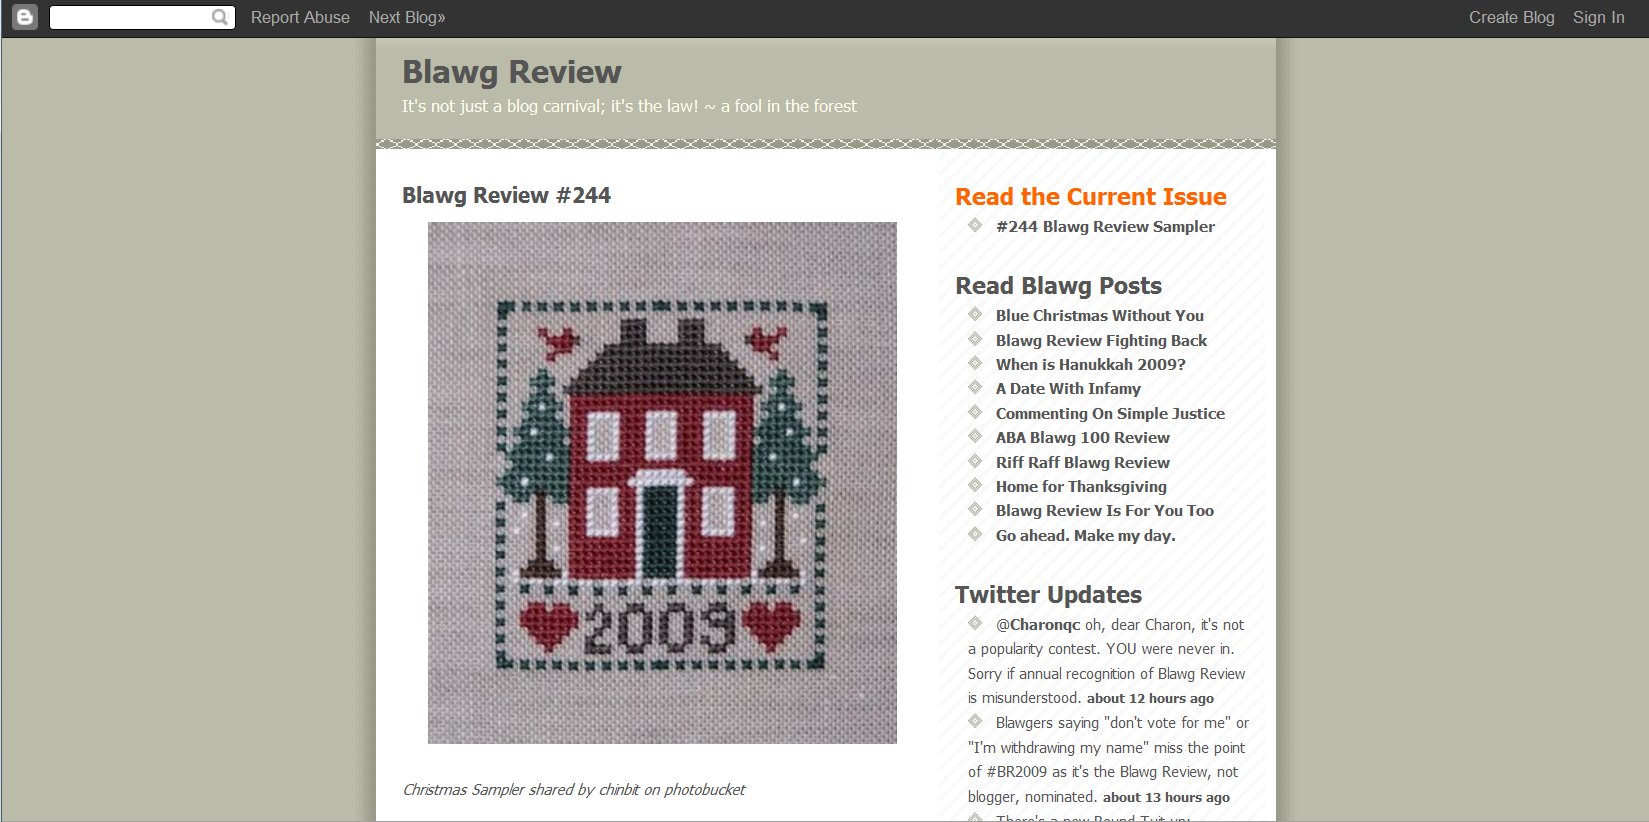 Blawg Review for 2009